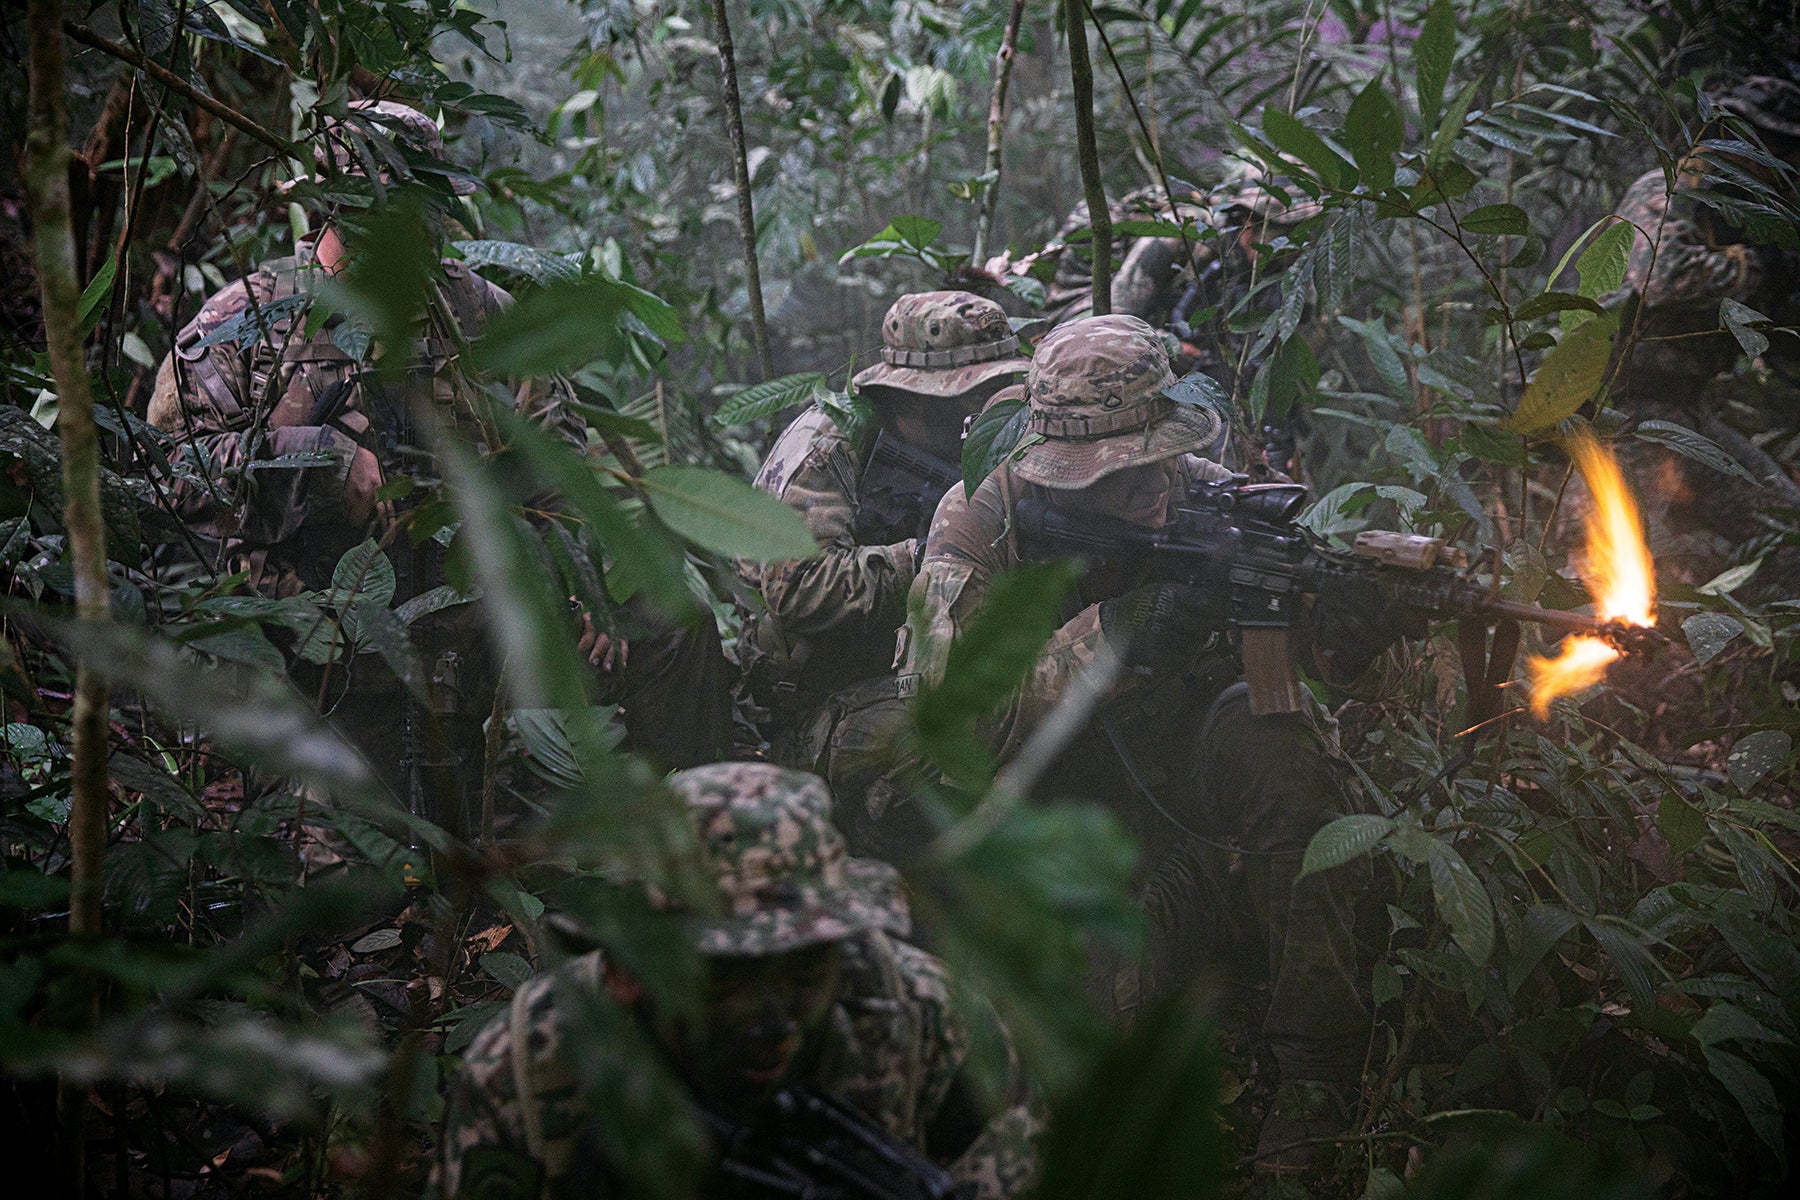 Soldiers from the 3rd Infantry Brigade Combat Team, 25th Infantry Division, and Malaysian troops train together during an exercise in a Malaysian jungle. (Credit: U.S. Army/Pfc. Wyatt Moore)